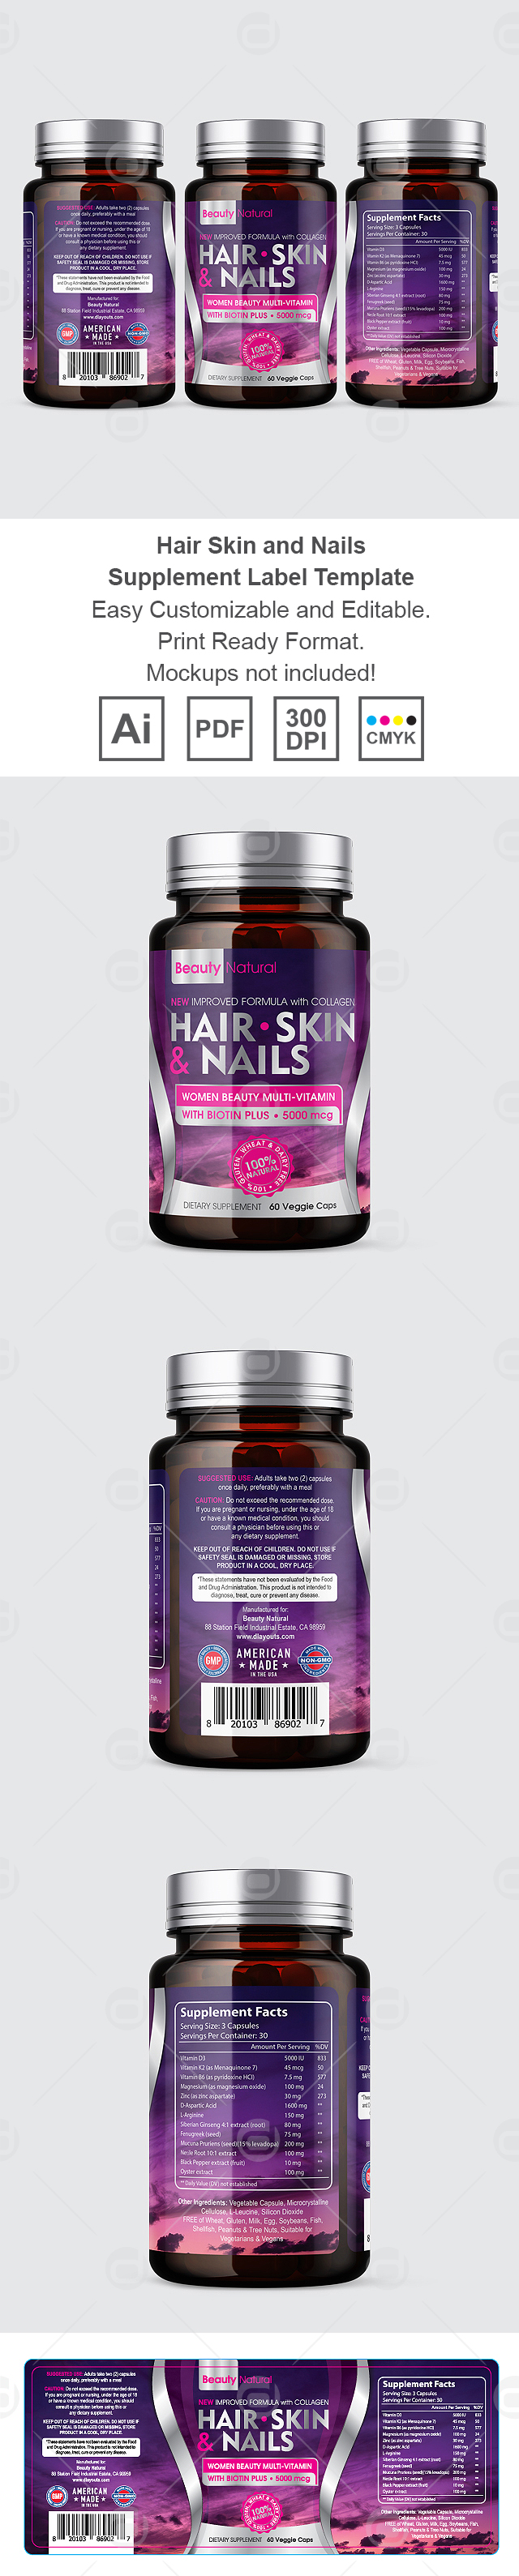 Hair, Skin & Nails Supplement Label Template